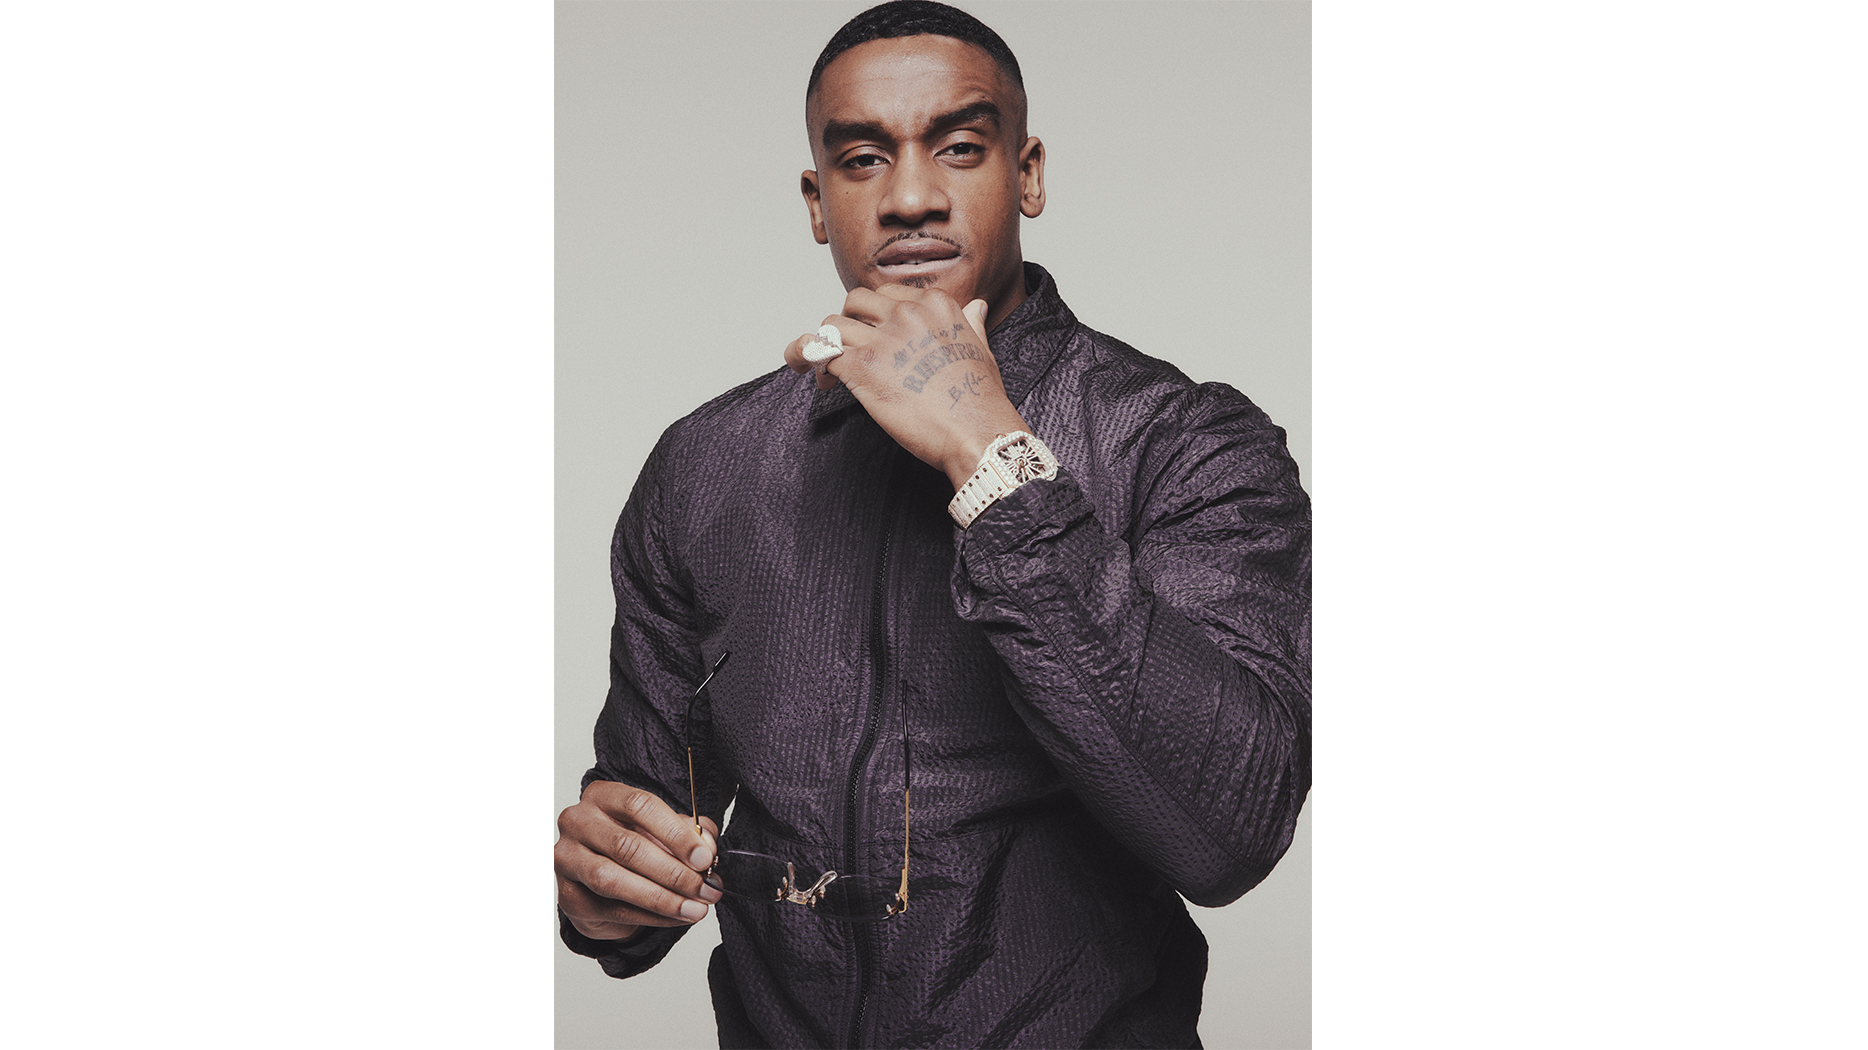 Bugzy Malone love - That accent.. That hustlers ambition got me in